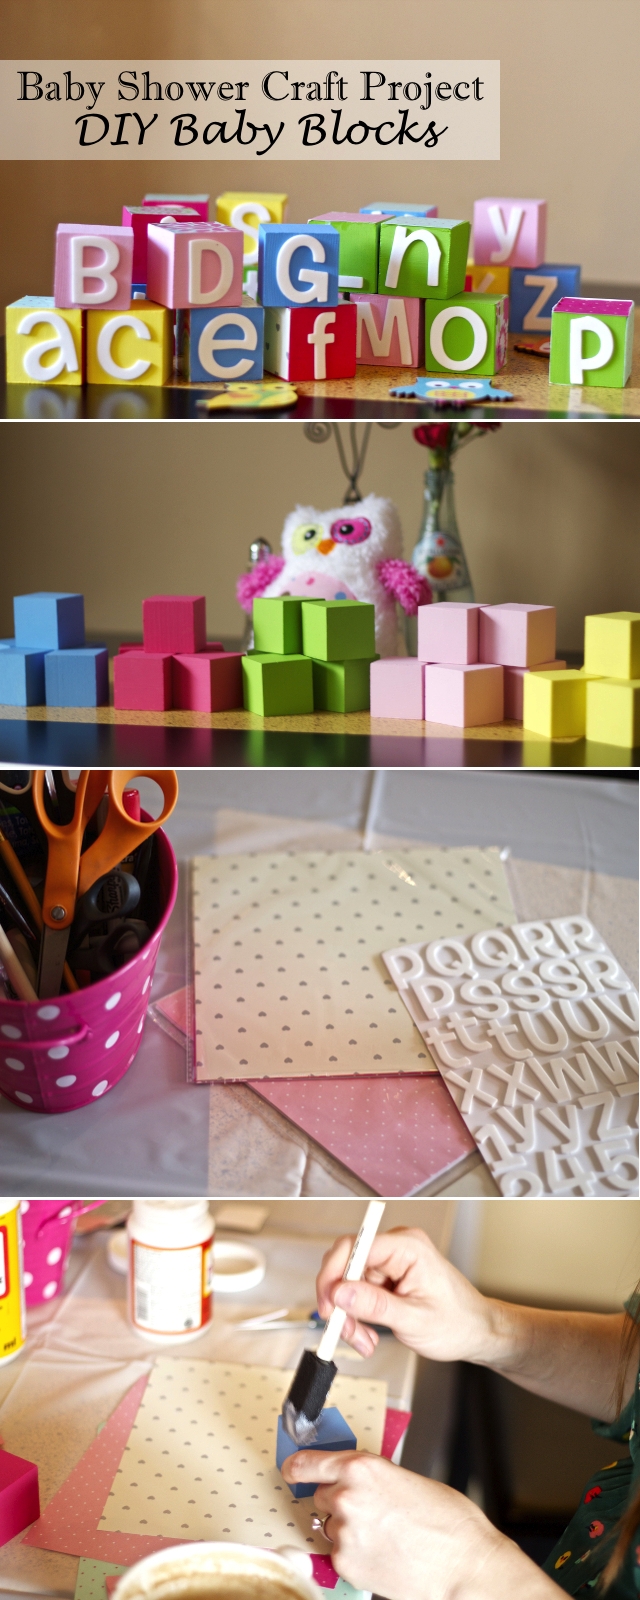 10 Nice Craft Ideas For Baby Shower chasing davies baby shower craft idea diy baby blocks gifts 1 2022